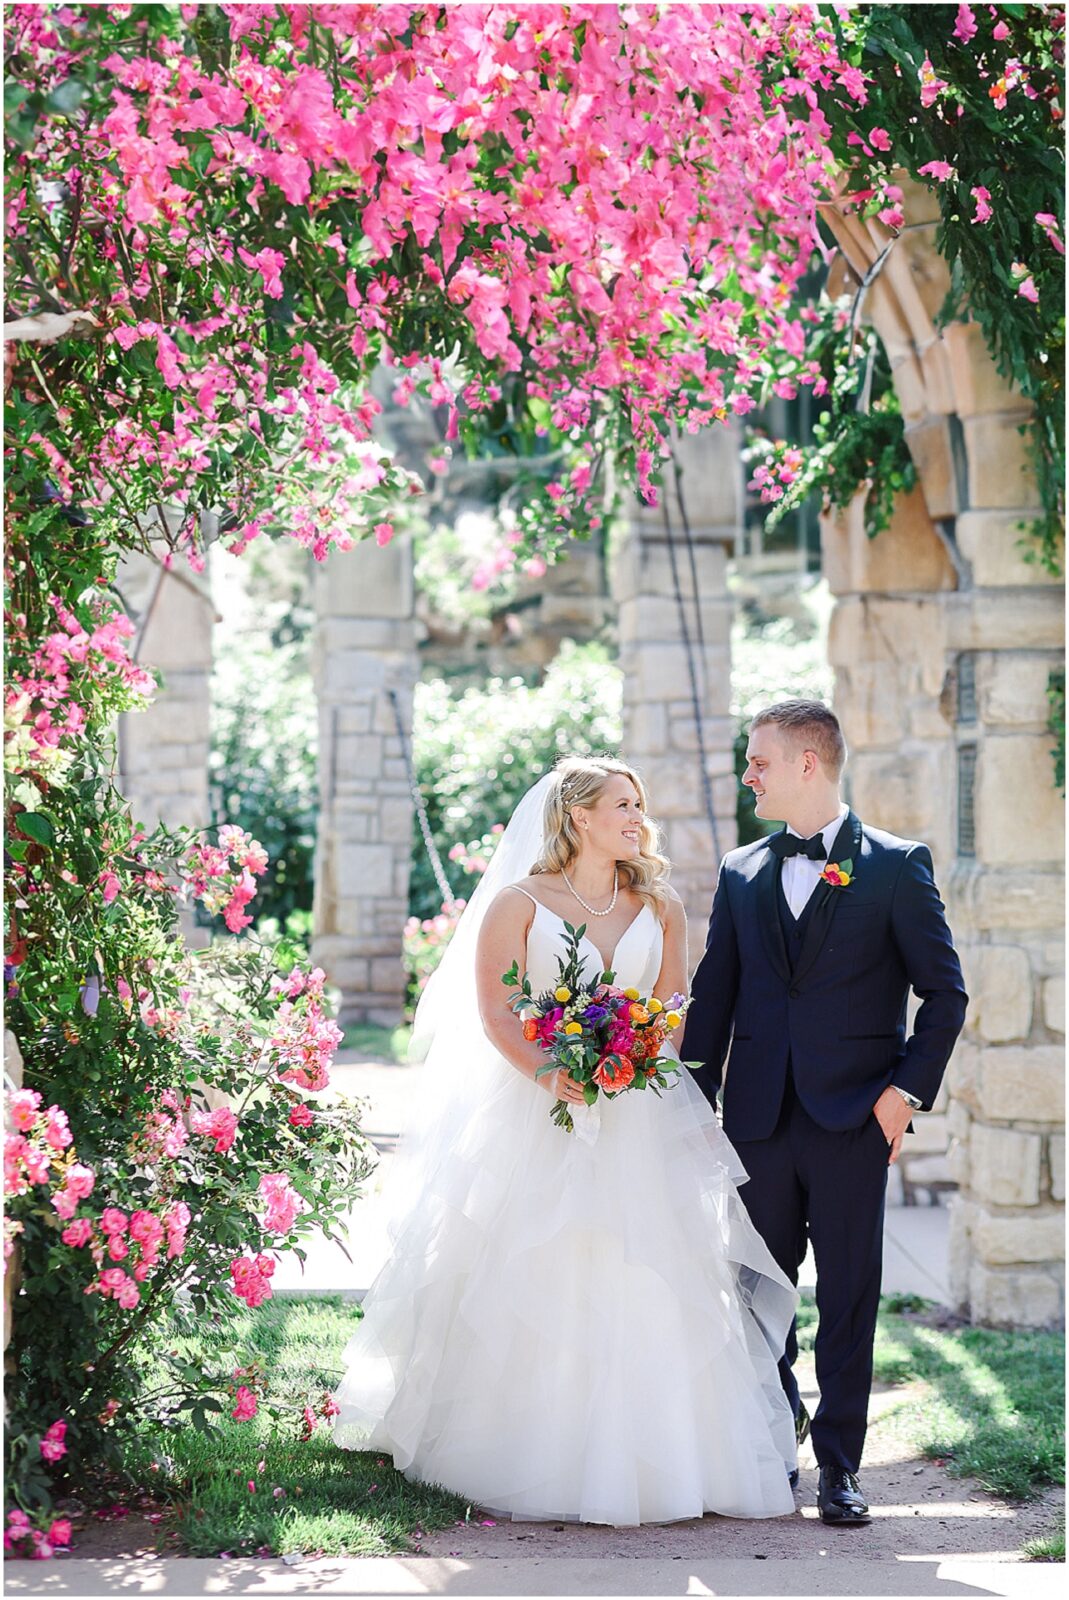 Colorful Summer Wedding in Kansas City at the Loose Park Rose Garden and 2016 Main Wedding Venue | Photos by Mariam Saifan Photography | Kansas City Wedding Photographer | Gorgeous PInk Flowers | Stunning Luxury Wedding Photos | Martha Stewart Weddings | Vogue Weddings | Destination Wedding Photographer | Pink Bridal Party Dresses & Colorful Wedding Flowers 